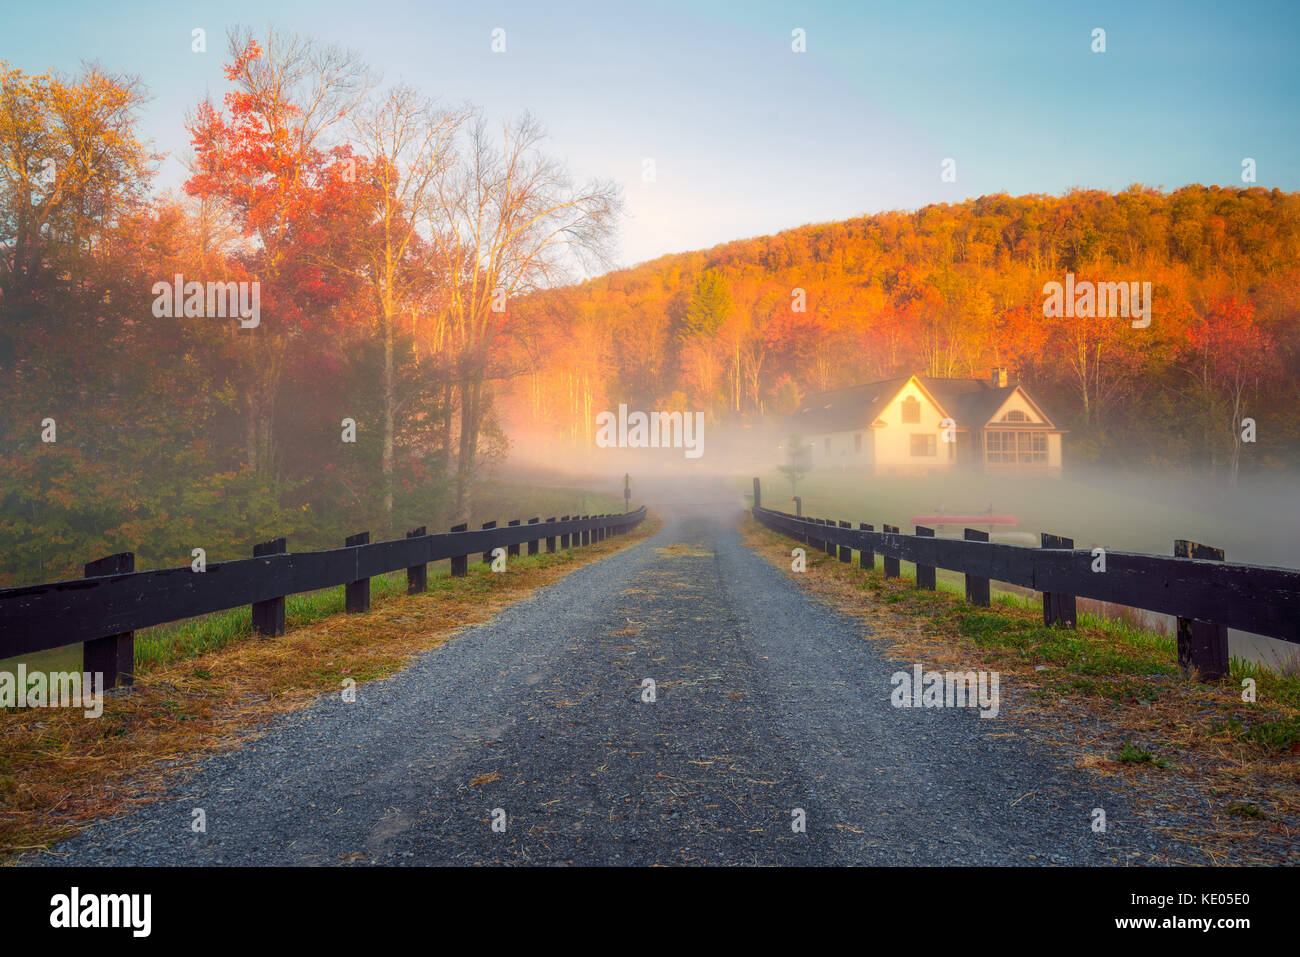 A long, fence-lined lane leads into a bank of fog with glowing sunlit autumn foliage in the background. Stock Photo